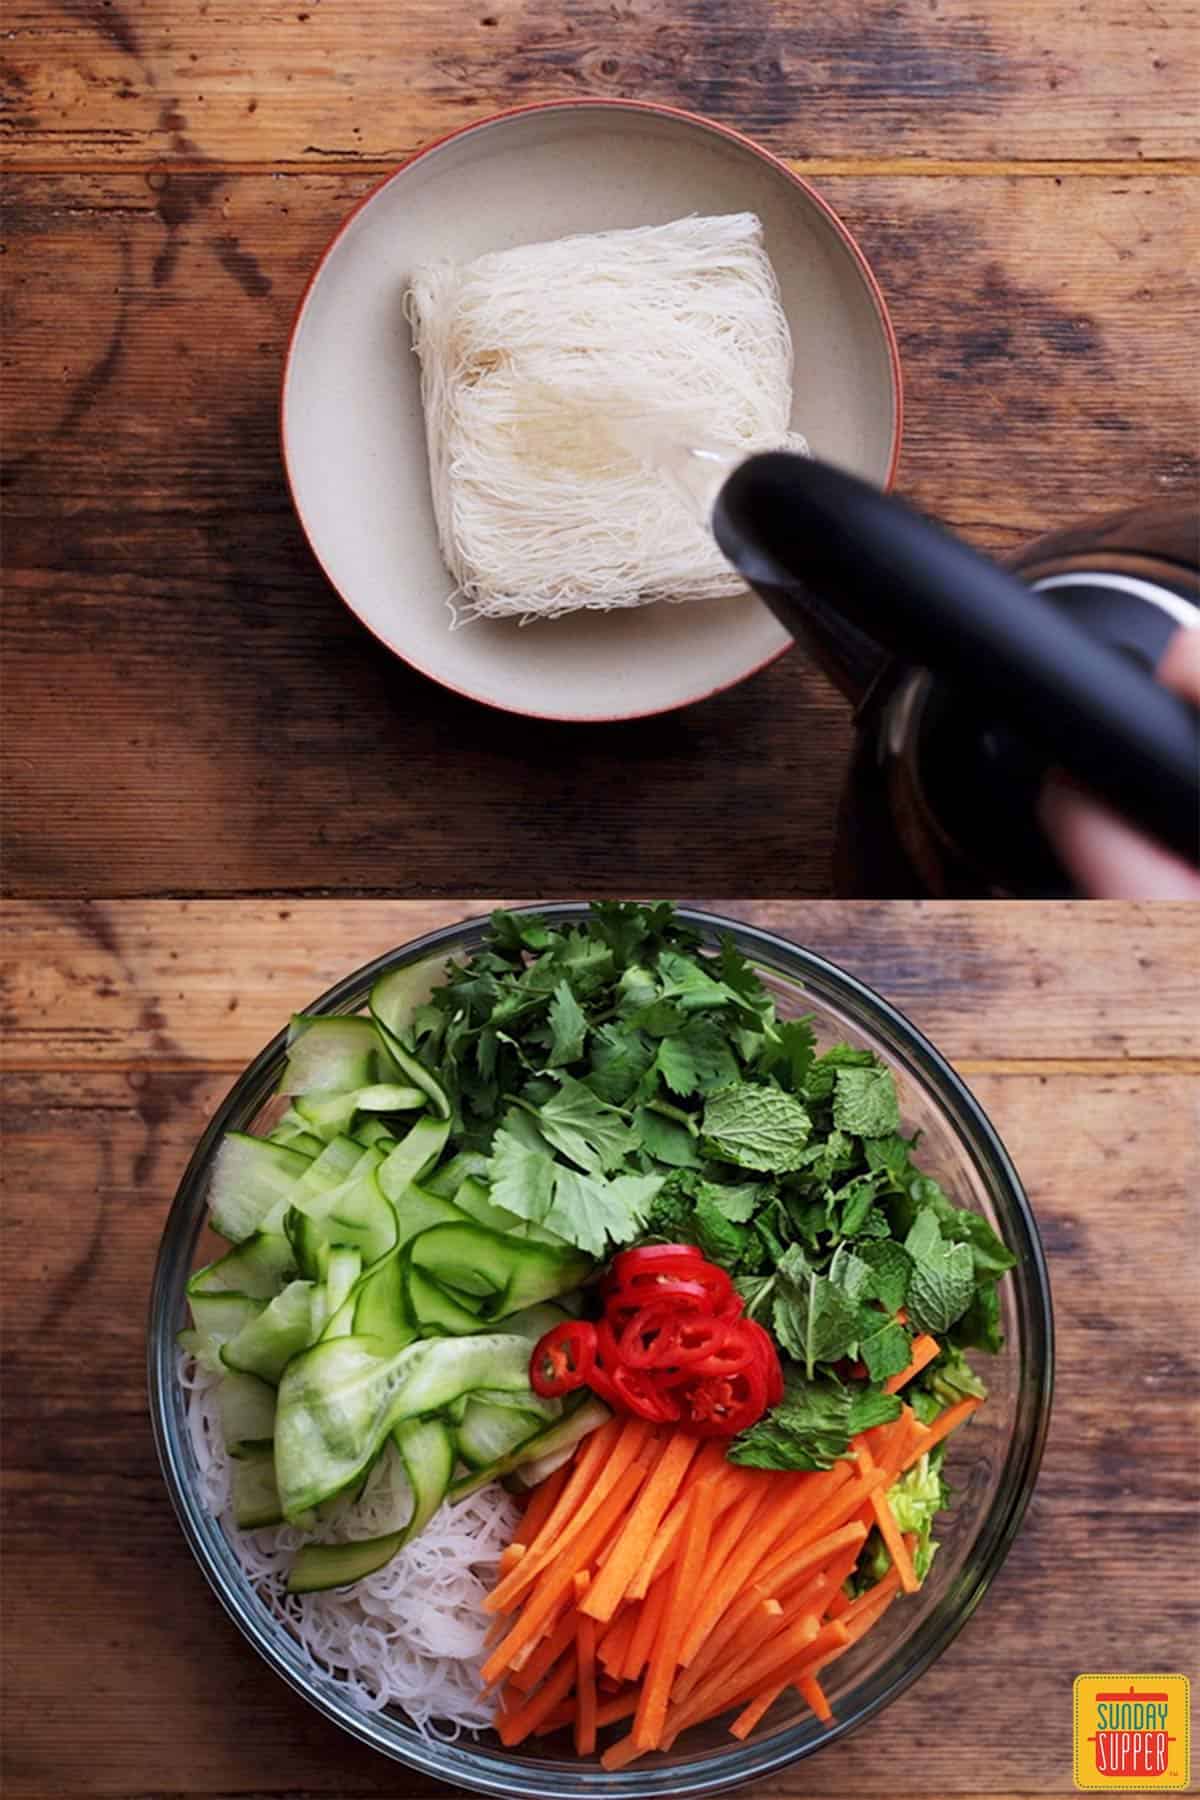 Soaking the rice noodles and preparing the salad greens